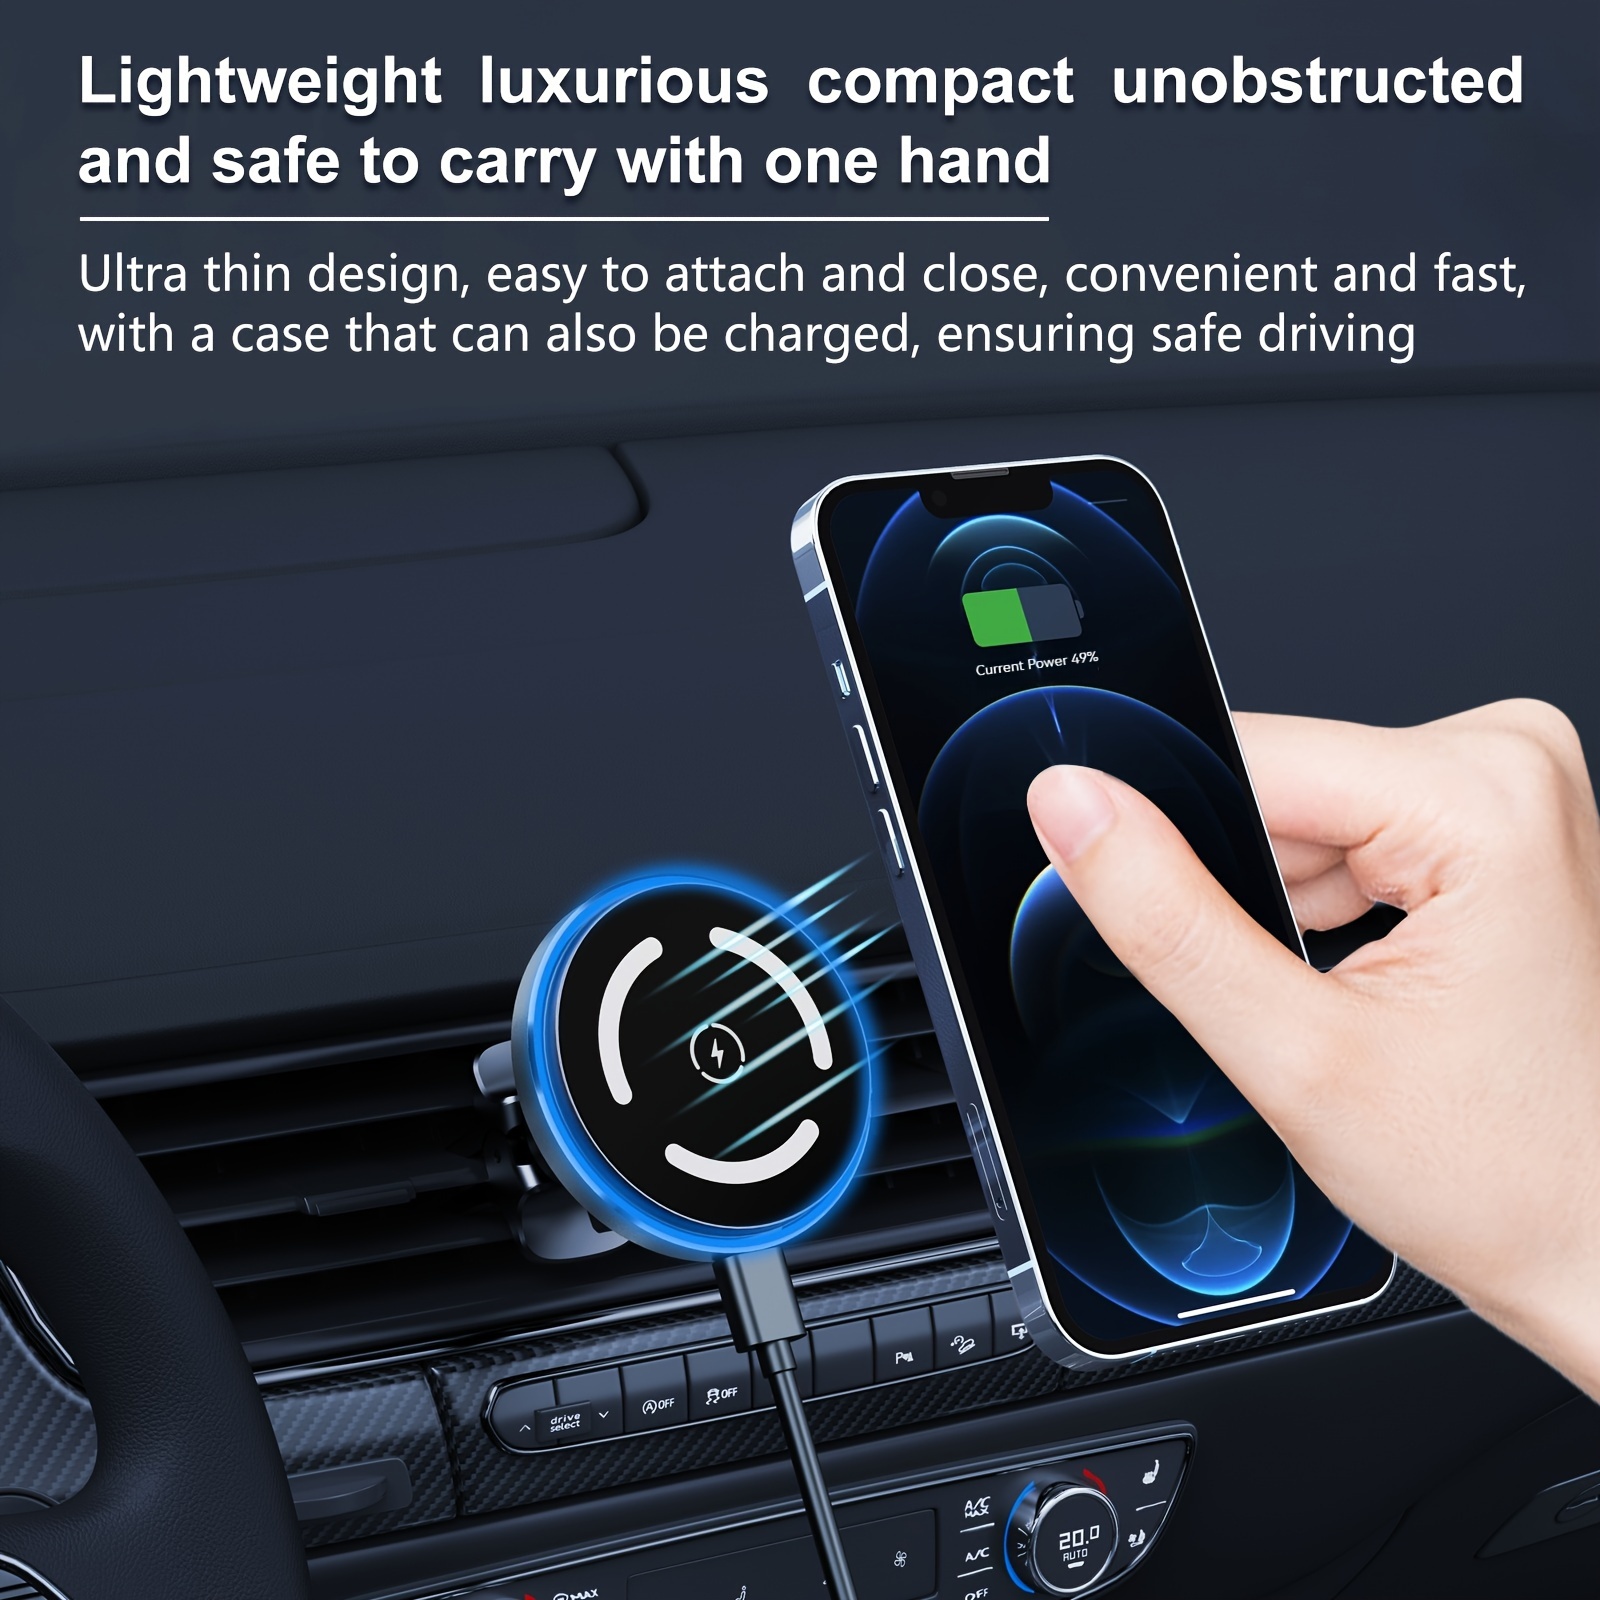 Wireless charger for mobile phones, Drive